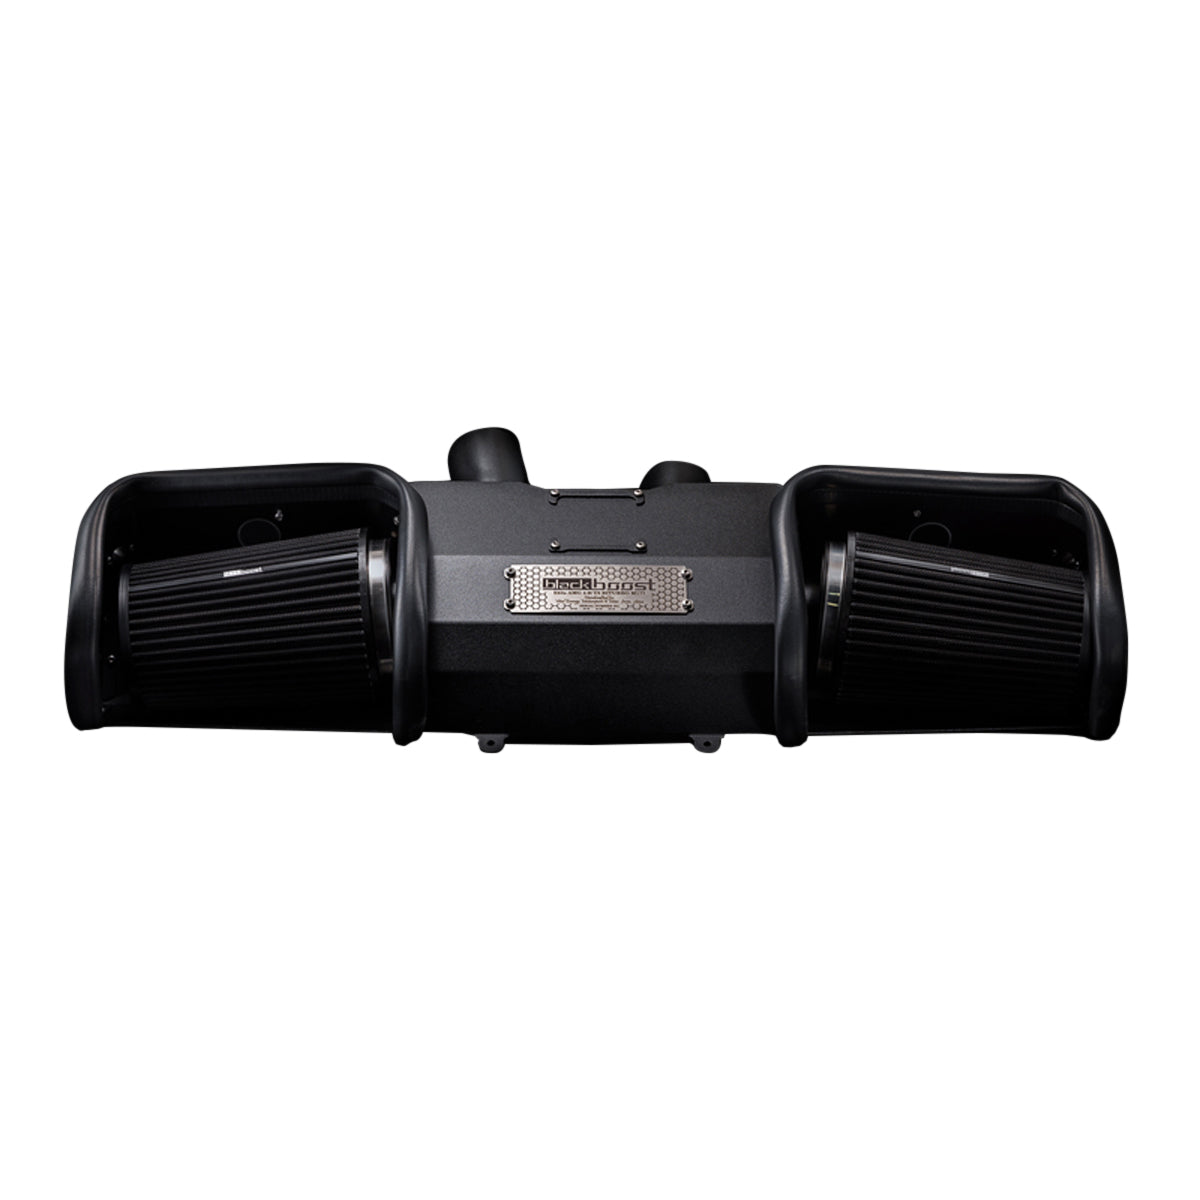 BLACKBOOST BBCAIS002 Cold Air Intake System for Mercedes Benz E63(S) (W213) / AMG GT63 4 Door (X290) M177 Photo-0 